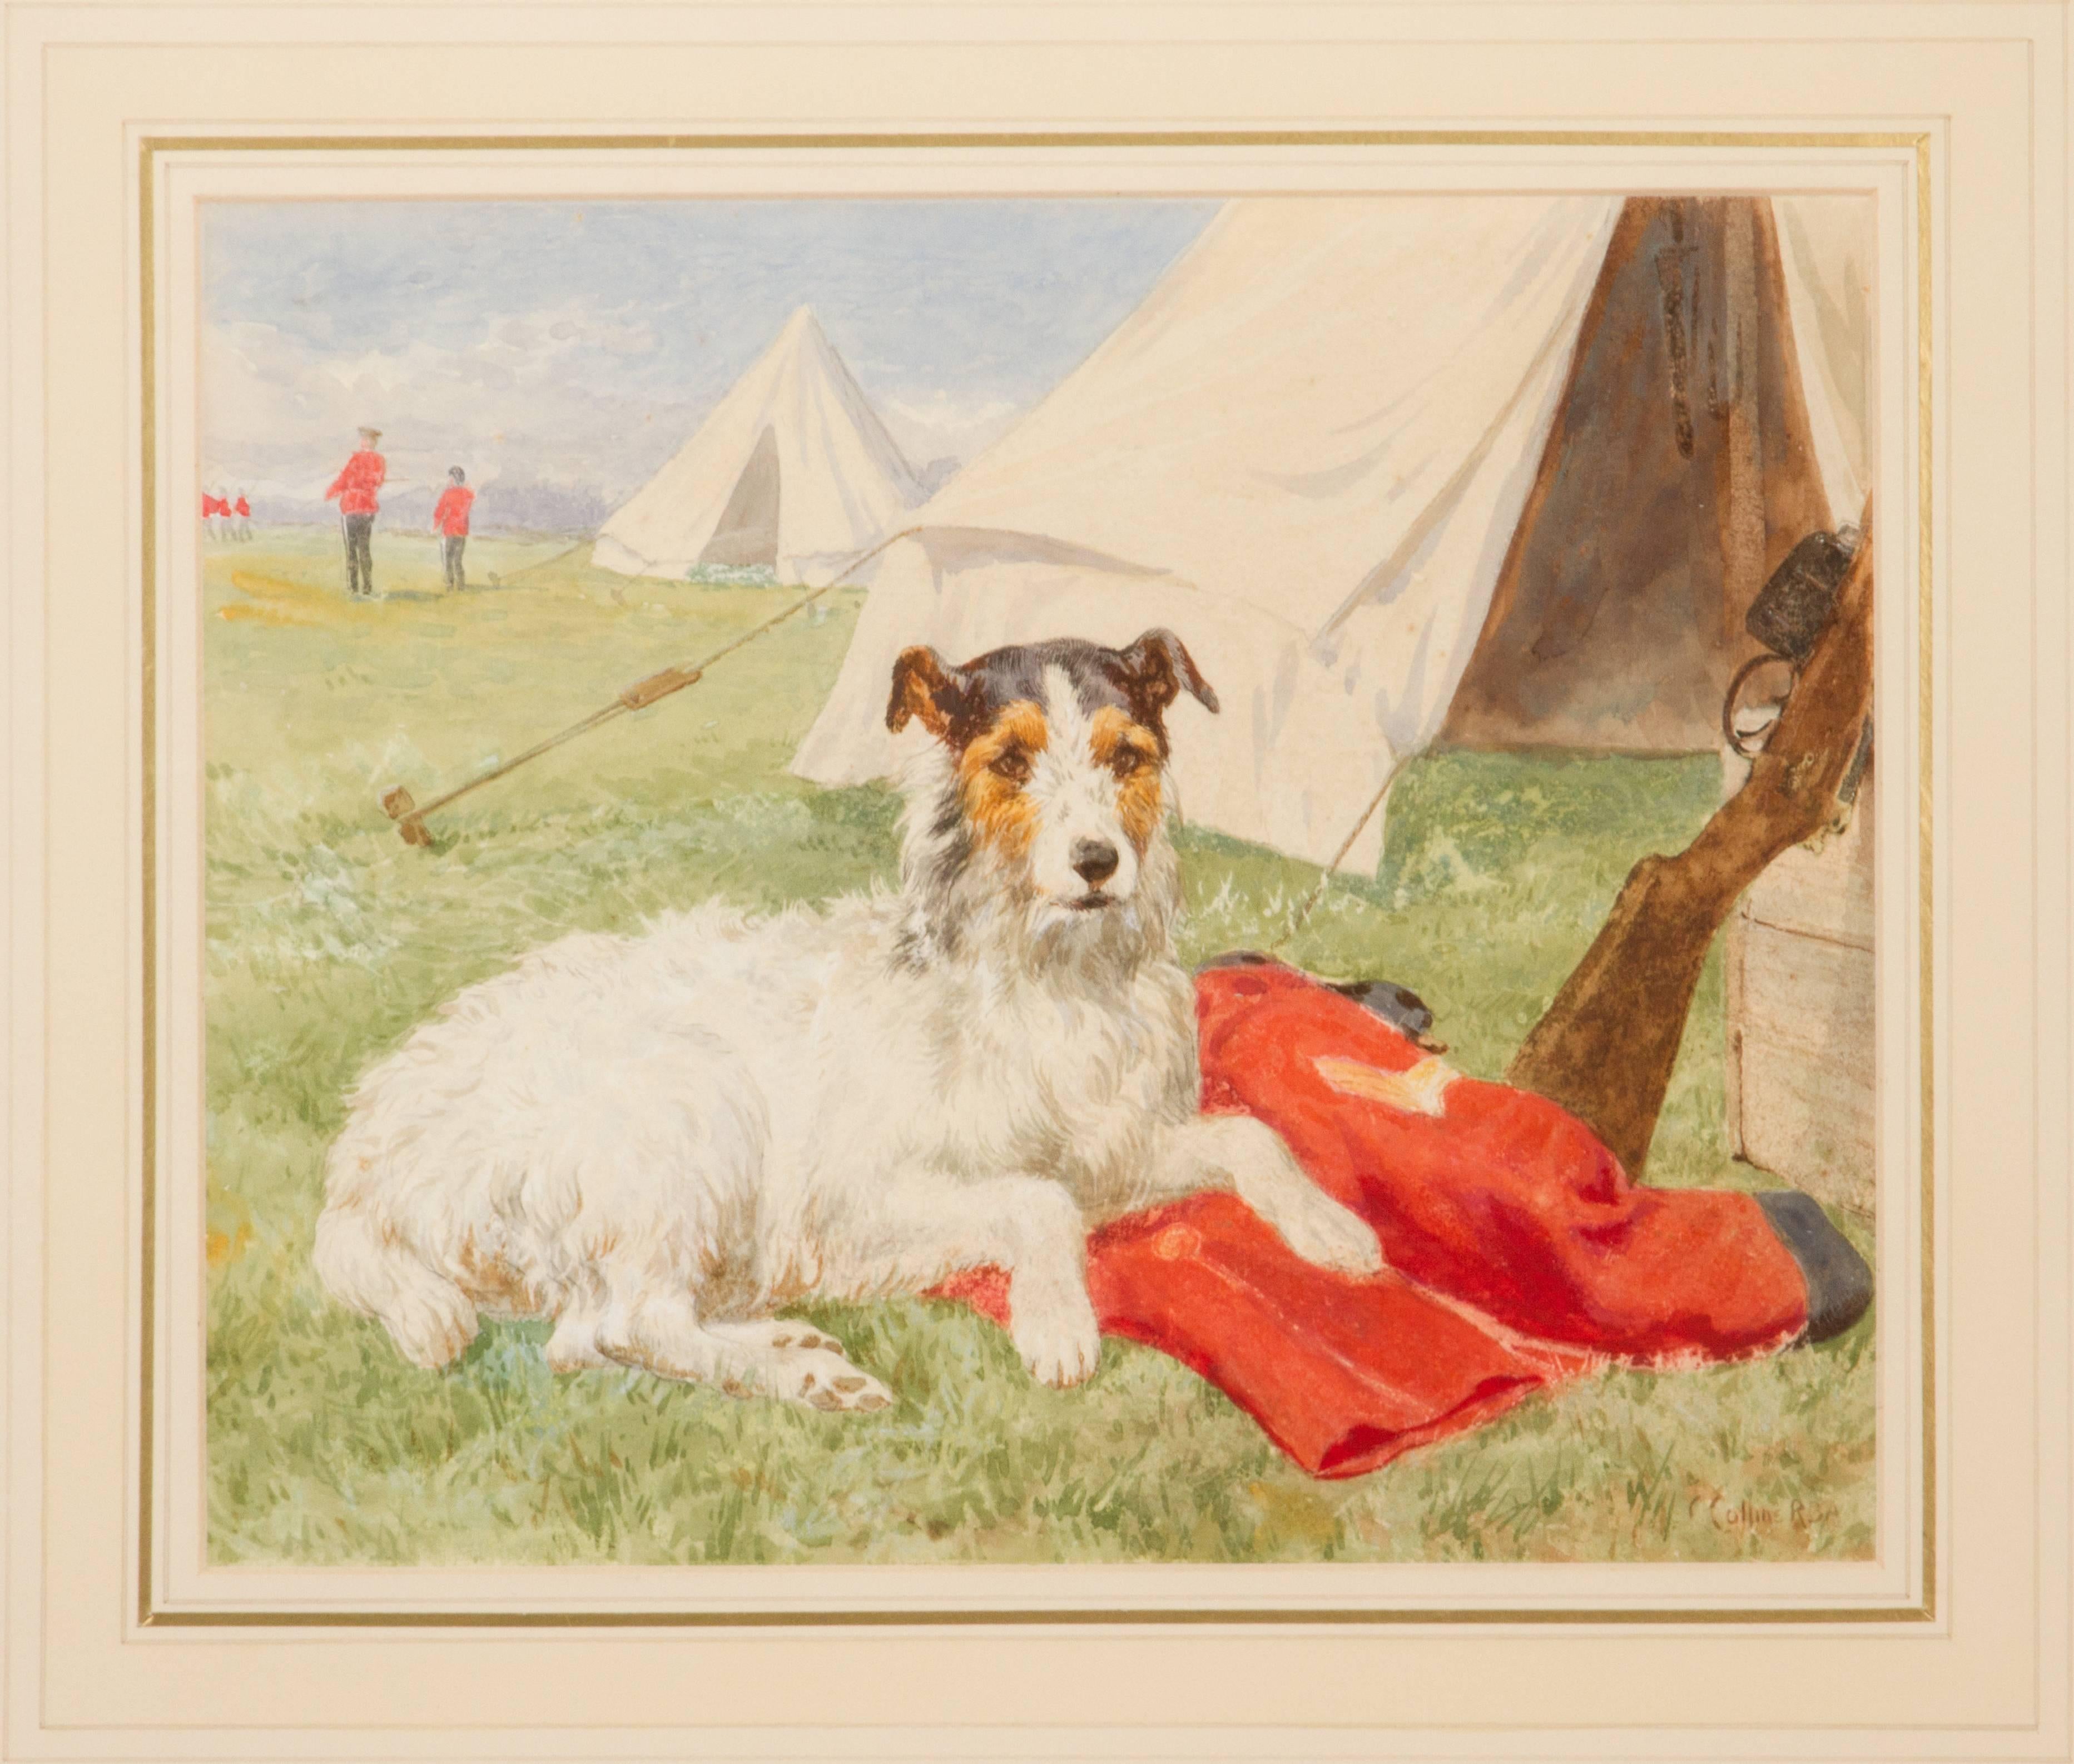 This is a lovely watercolor of a terrier sitting on his owners jacket. Painted by Charles Collins of the royal society of British artists.